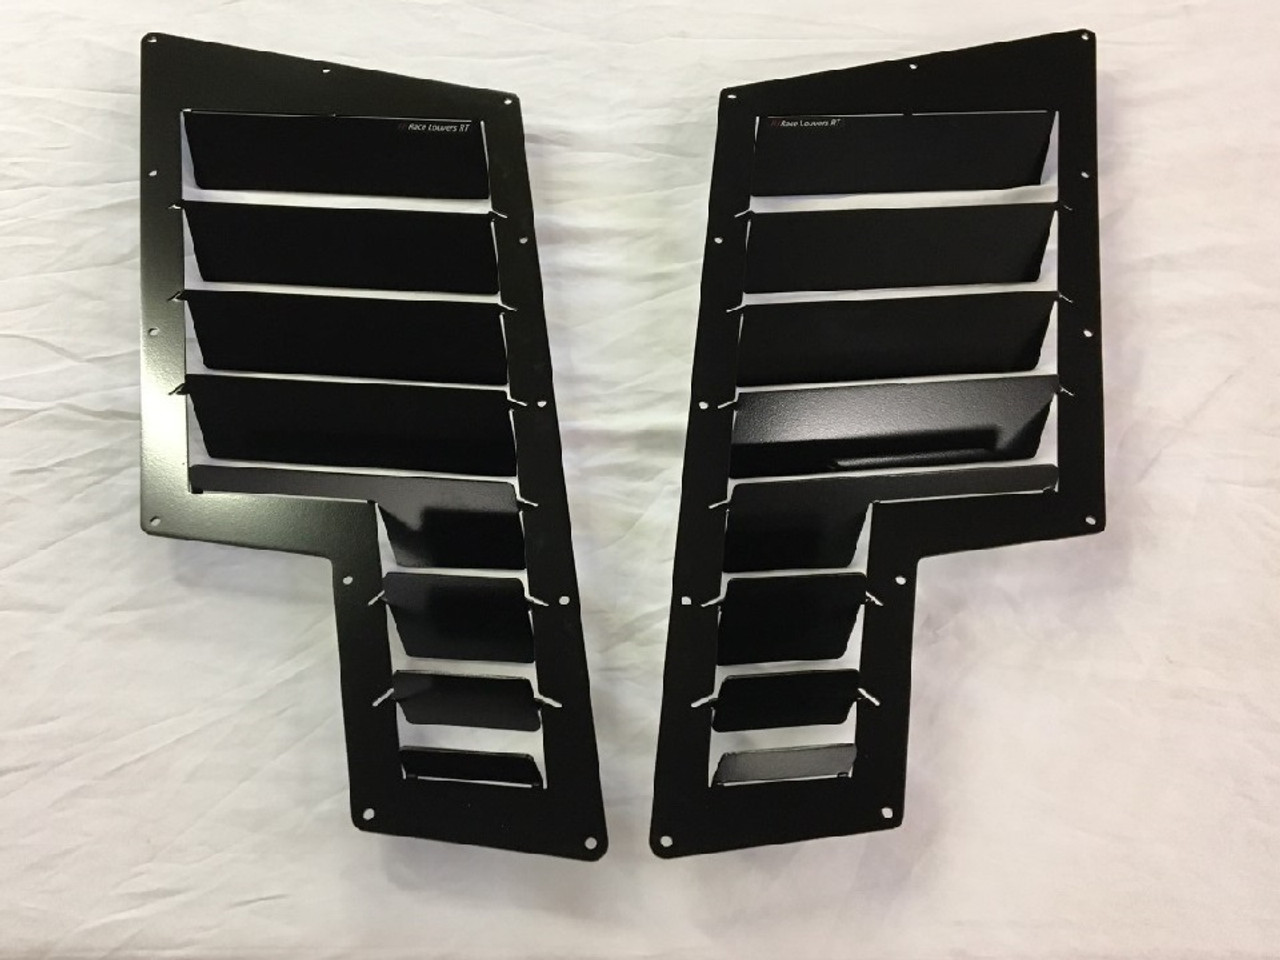 Race Louvers GT4 style RT track trim hood extractor pair is designed for street, high performance driving and track duty.